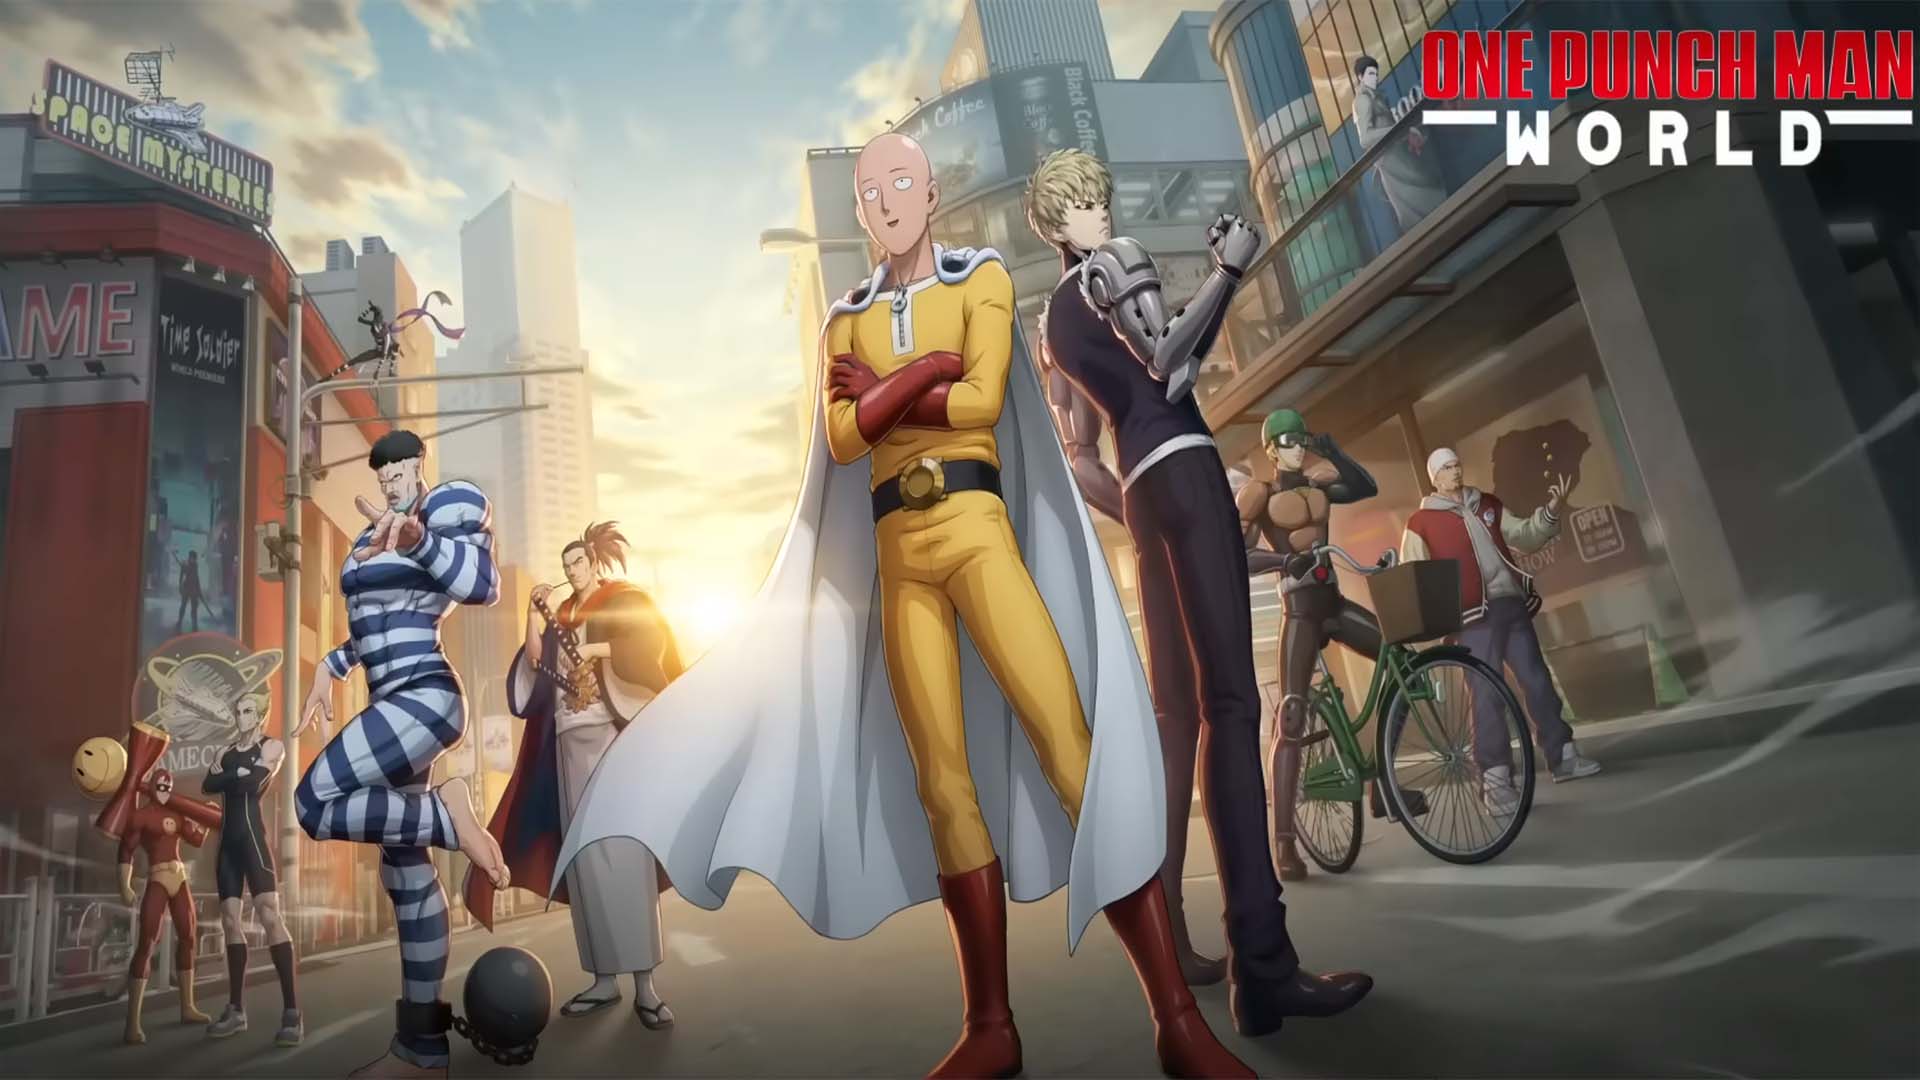 Heroes In One Punch Man World Posing